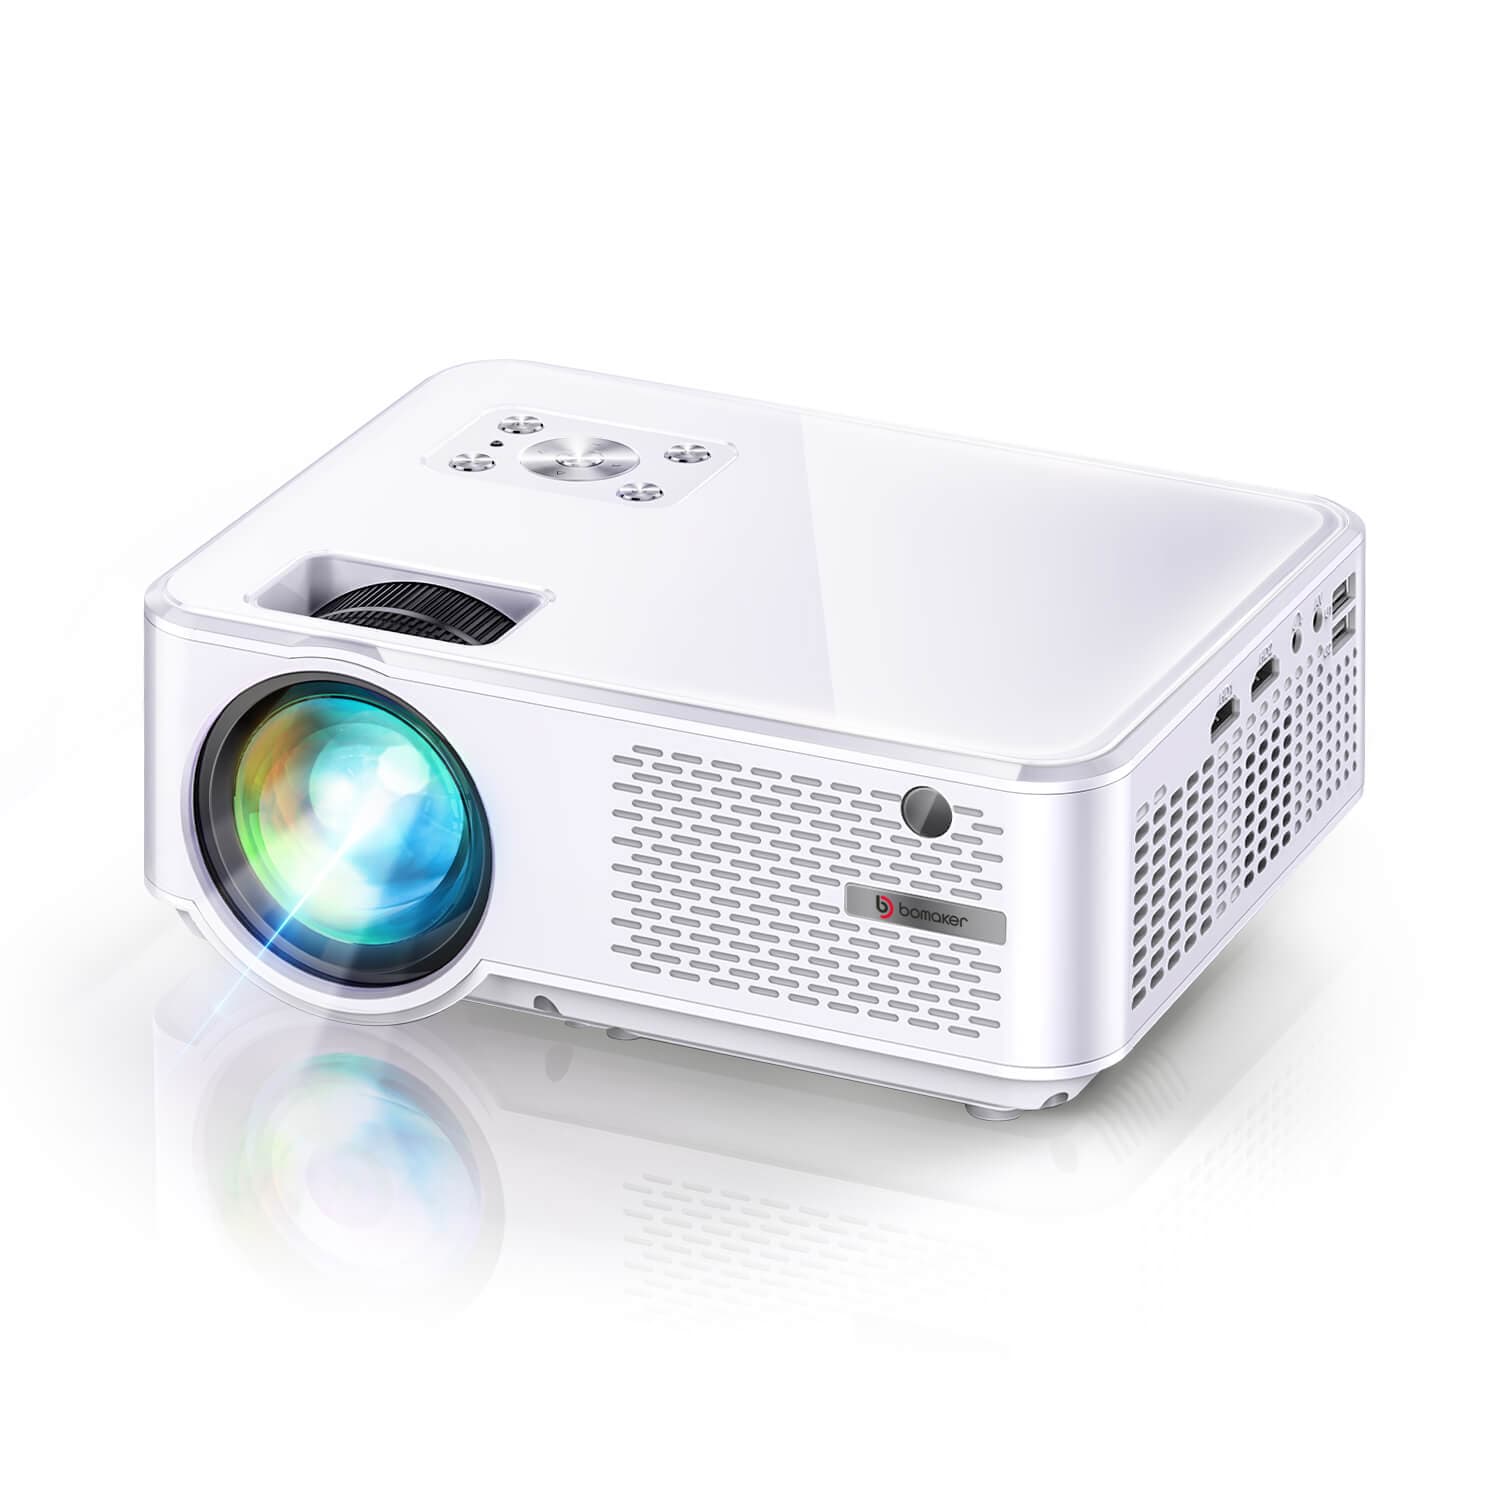 [Big Sale]Native 1080P Mini WiFi Projector for Smart Phone,Wireless Bluetooth Projector with Speakers,Mini Indoor Outdoor Movie Projector with Digital - 2